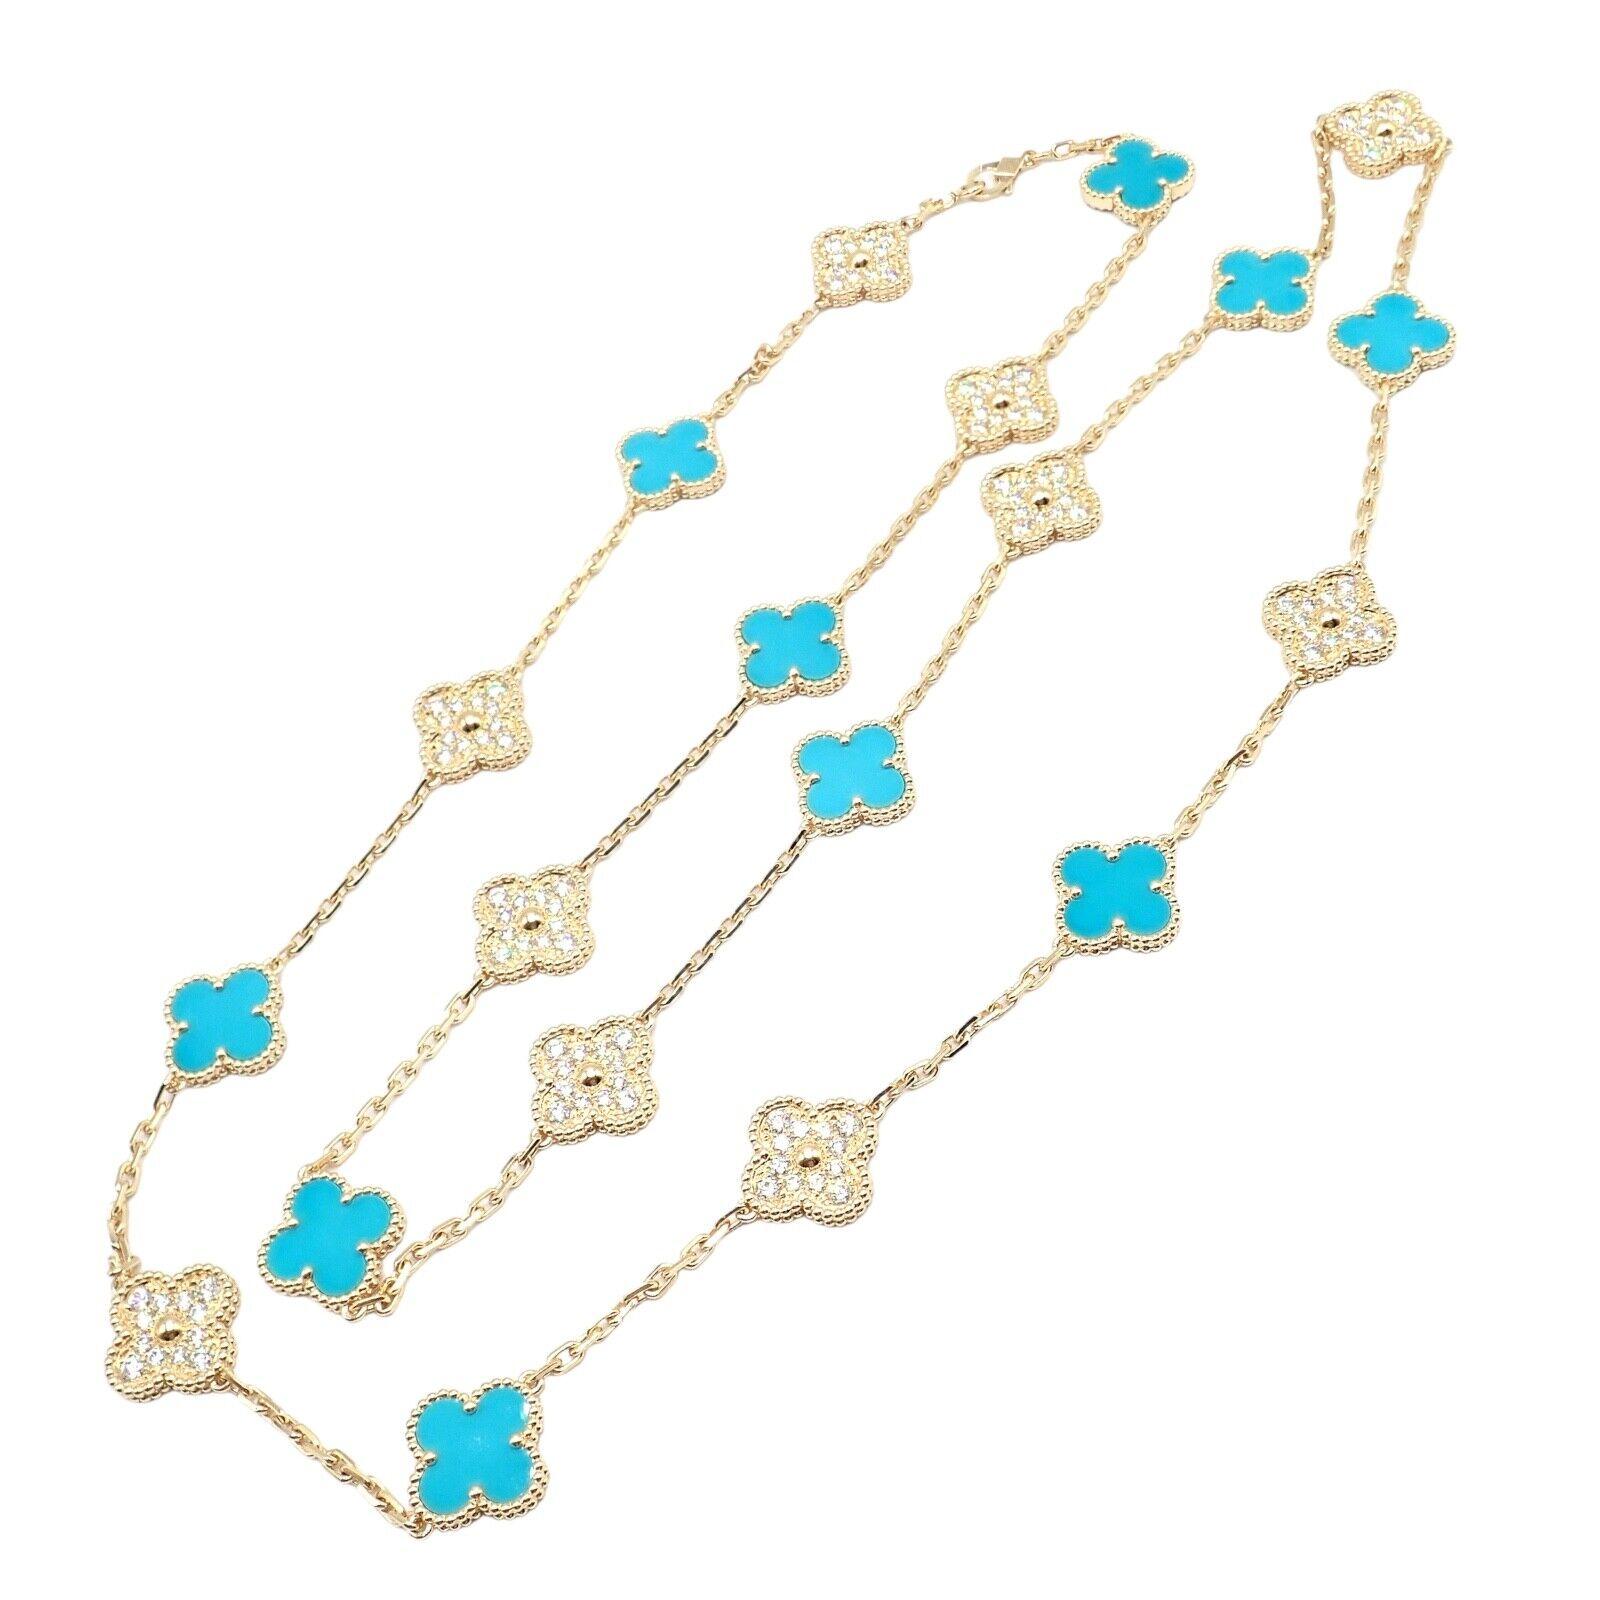 18k Yellow Gold Alhambra 20 Motifs Diamond And Turquoise Necklace by Van Cleef & Arpels. 
The Limited Edition Van Cleef & Arpels 18k Yellow Gold 20 Motif Alhambra Diamond Turquoise Necklace embodies timeless elegance. 
This luxurious piece features